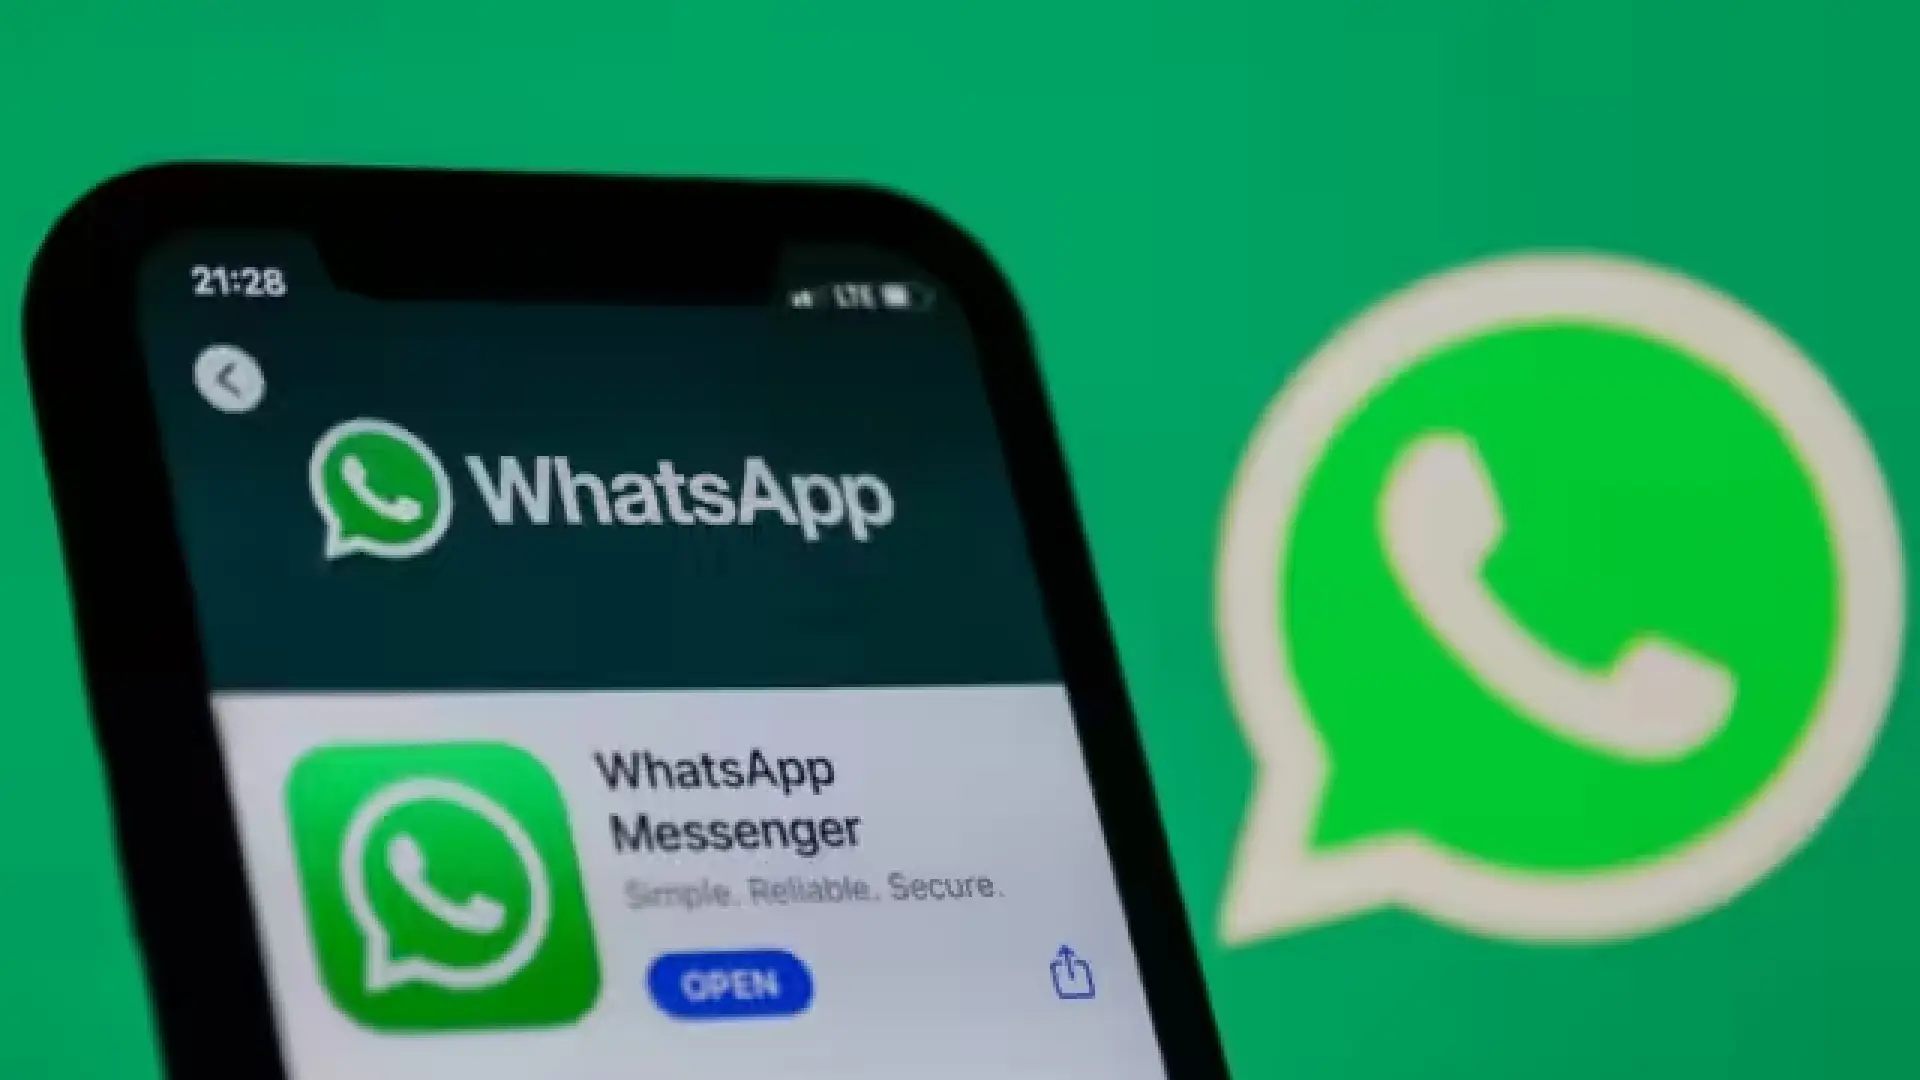 What Can Users Expect from the Upcoming WhatsApp Features?